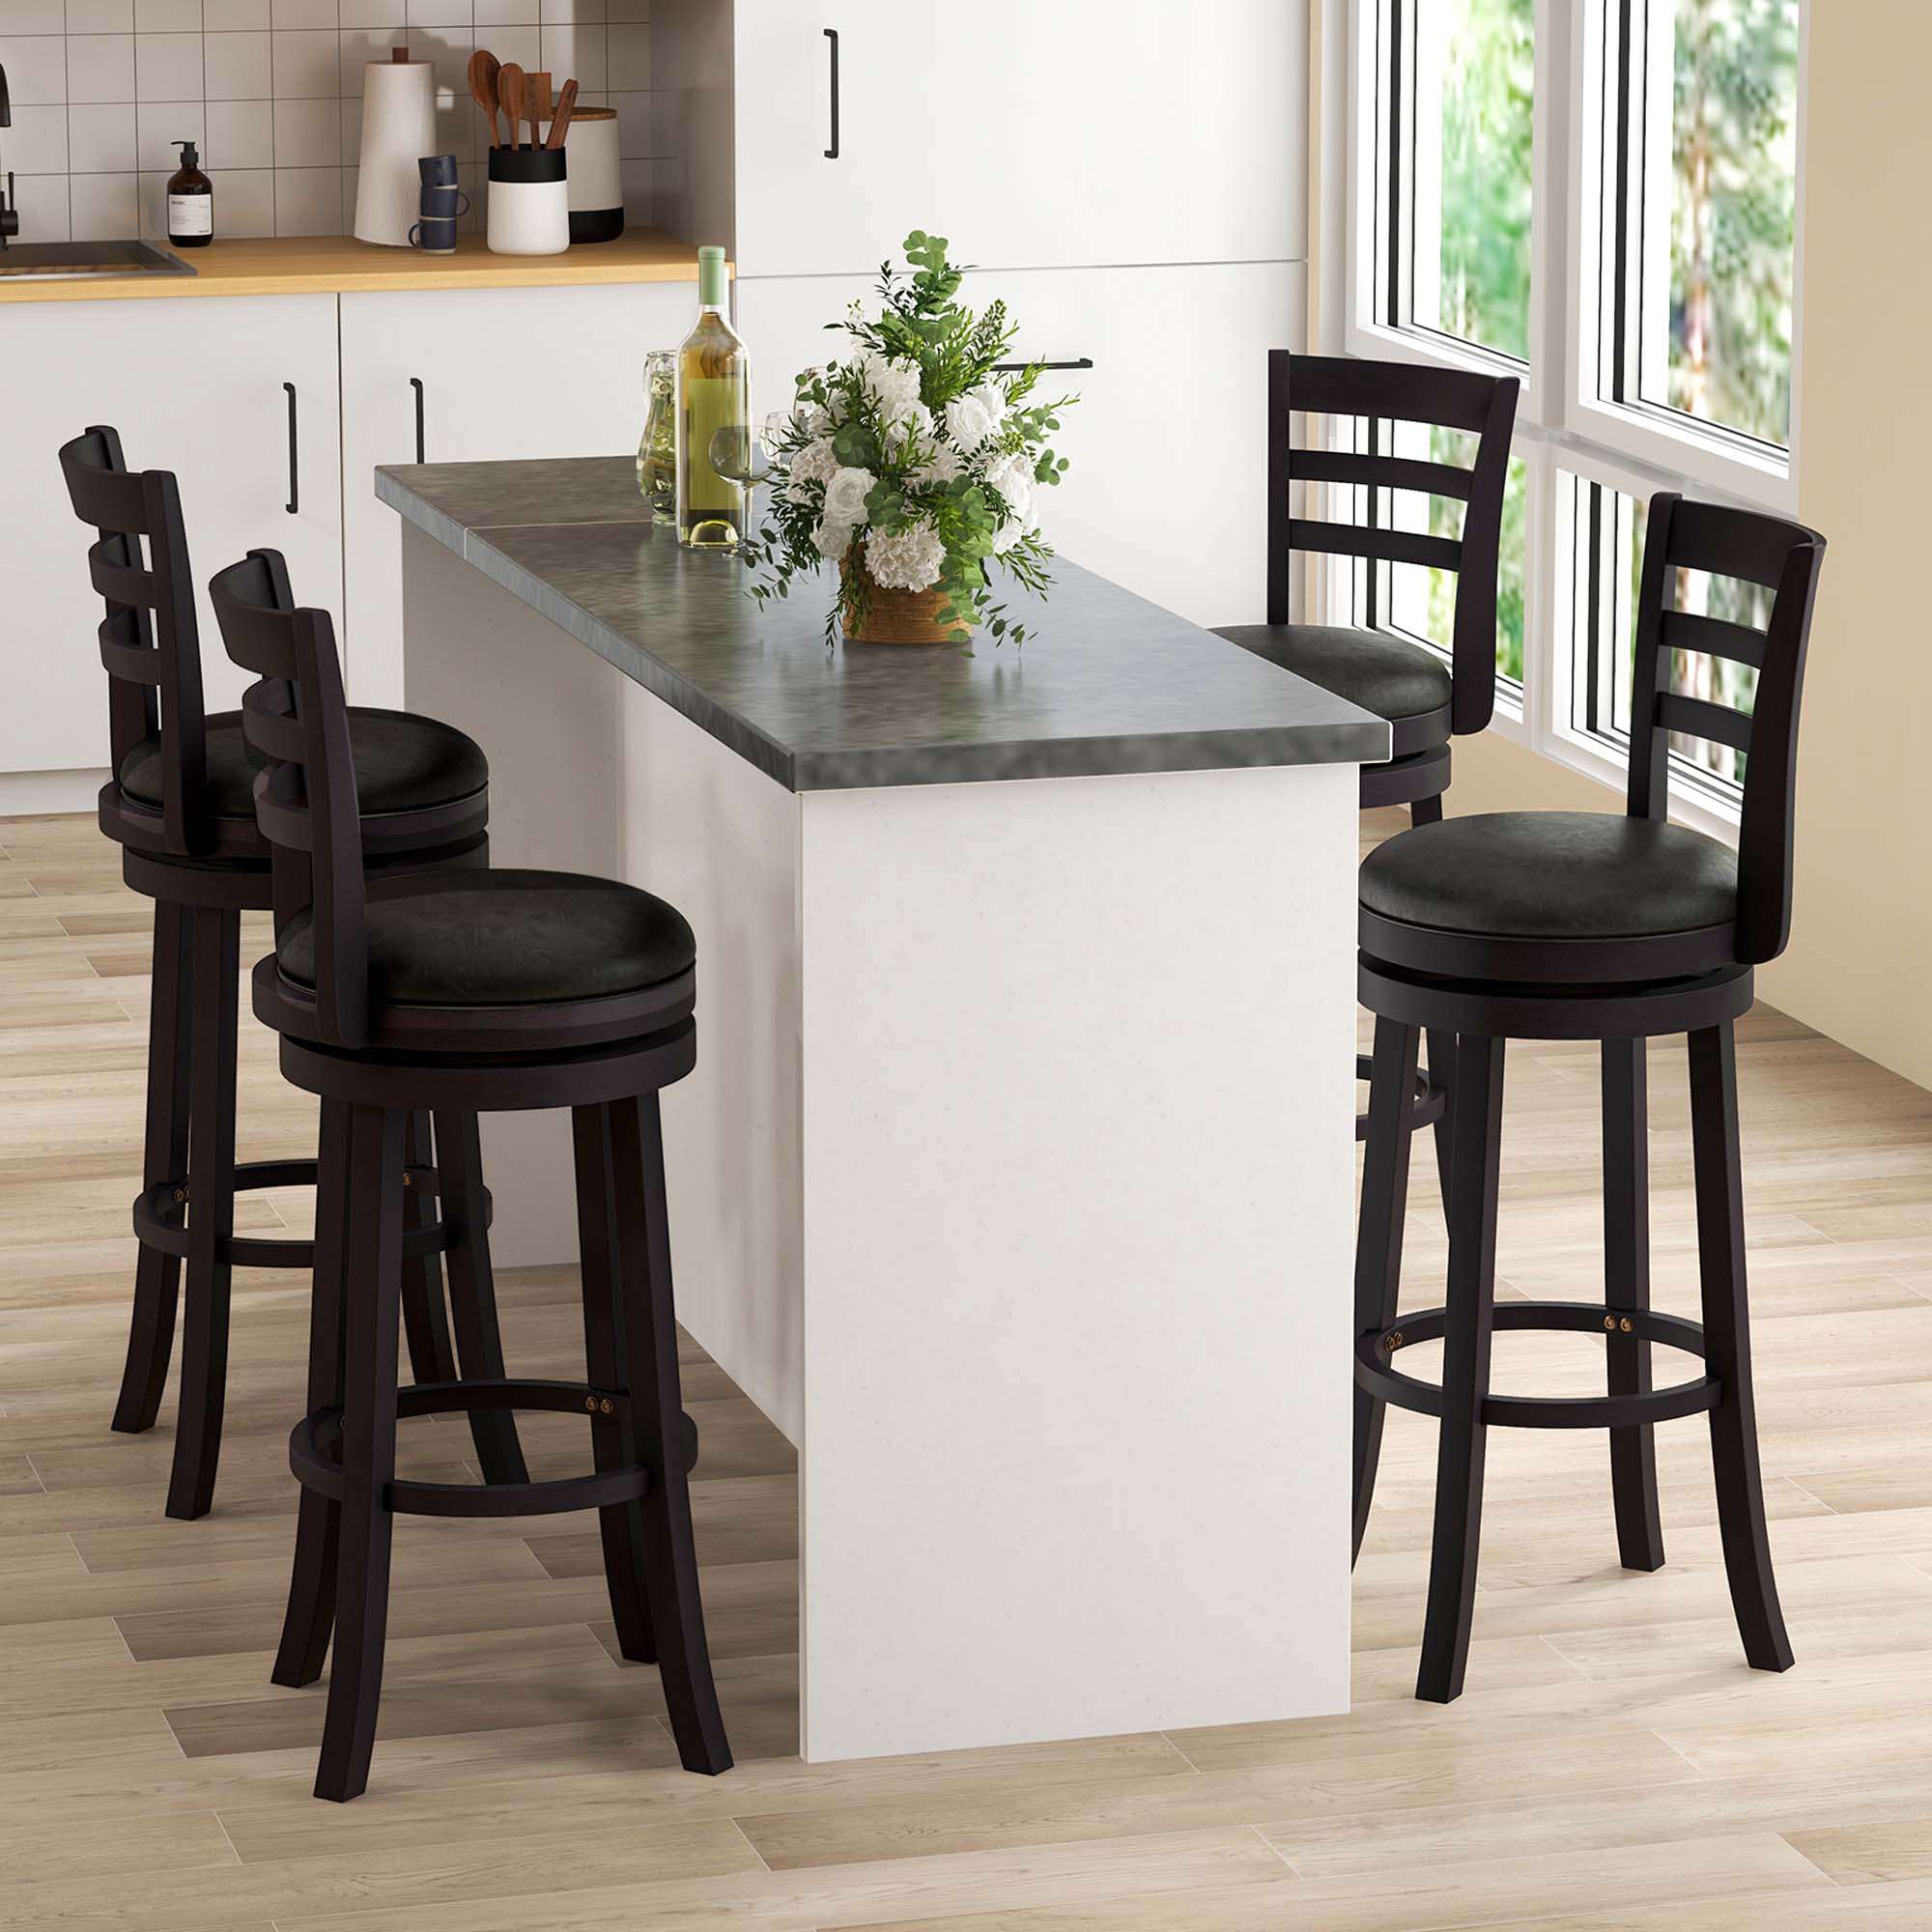 Costway Set of 4 Bar Stools Swivel Bar Height Chairs with PU Upholstered Seats Kitchen